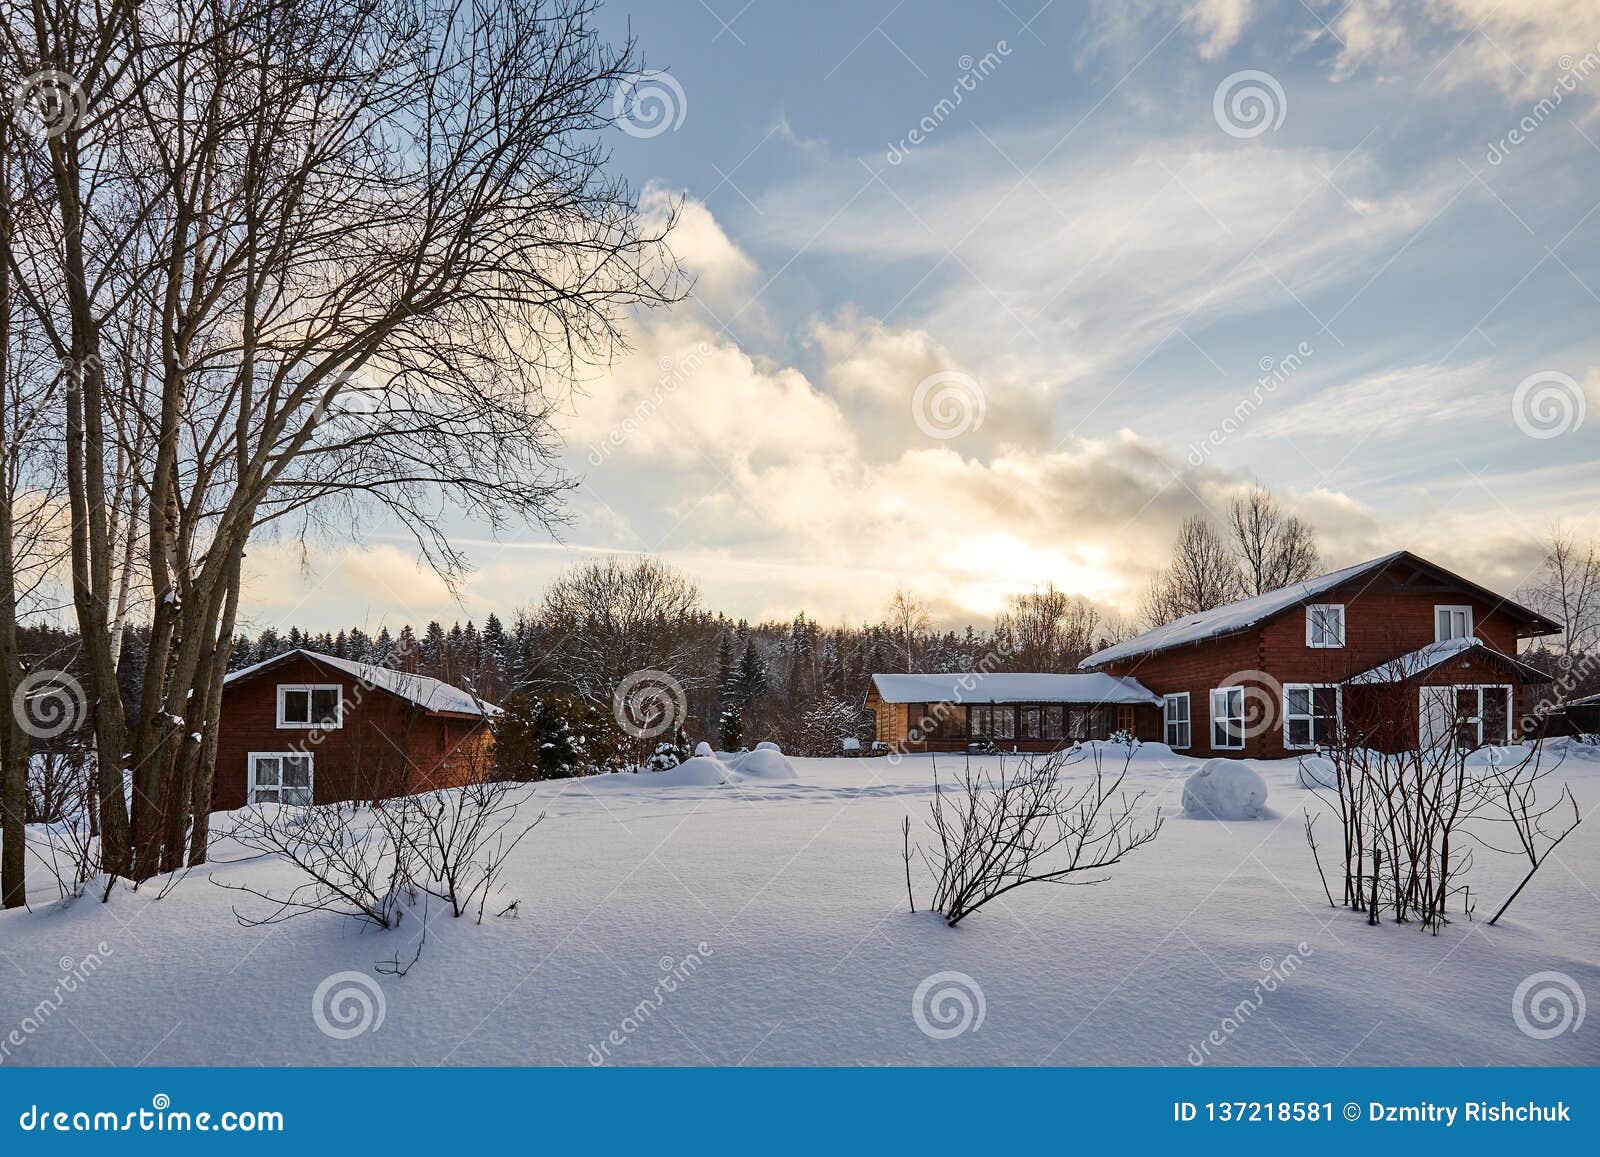 Winter House on Winter Snowy Panoramic Landscape Stock Image - Image of